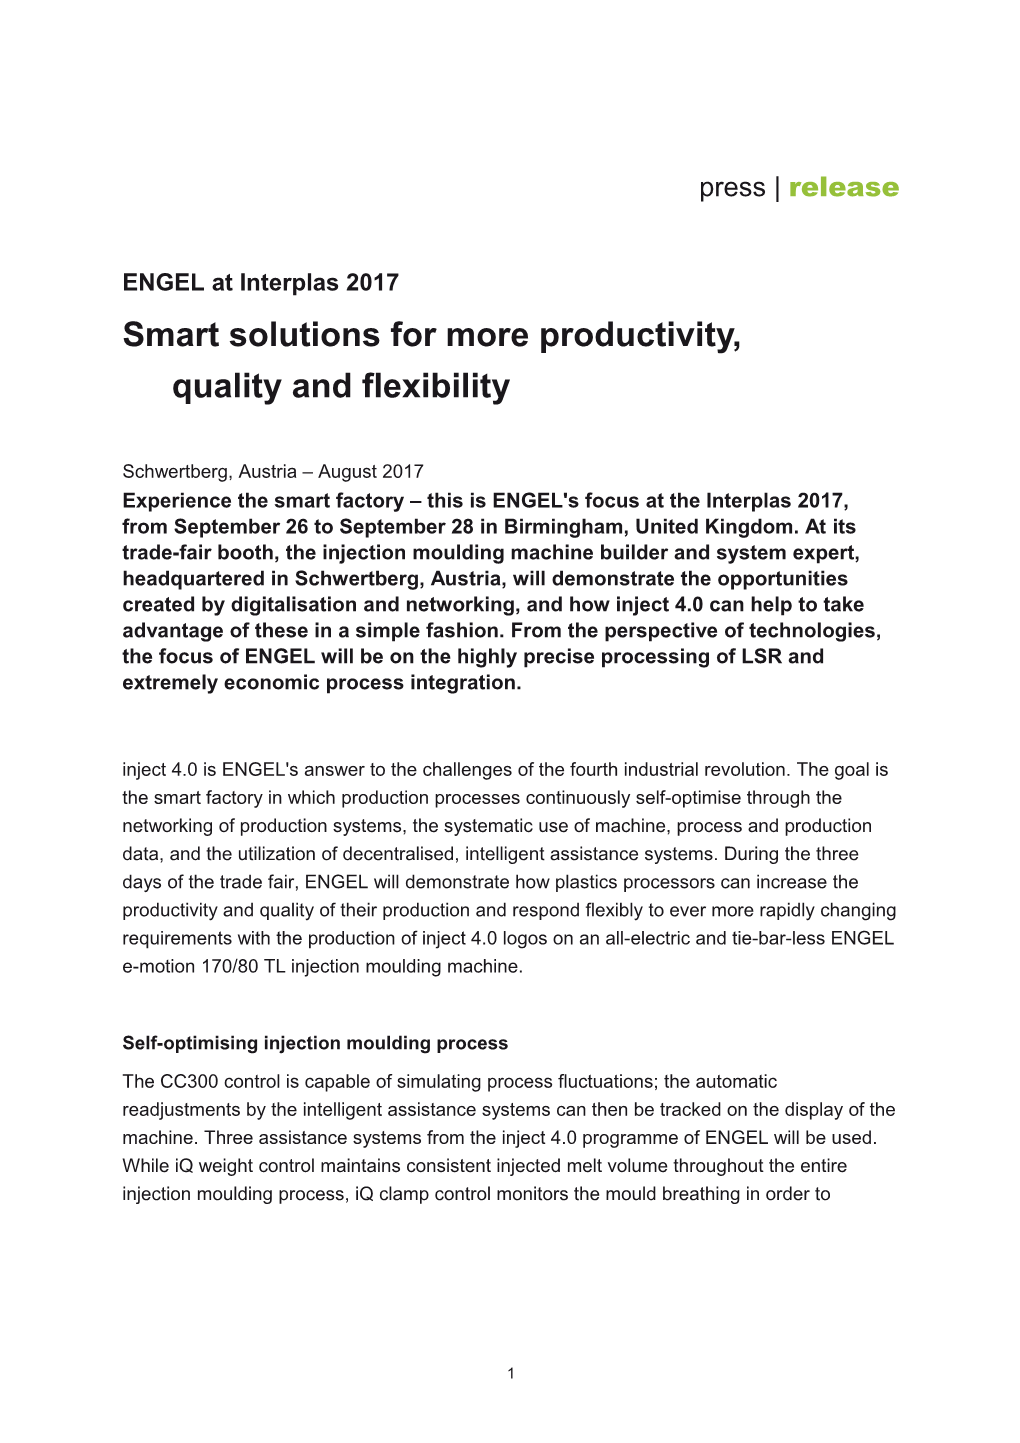 Smart Solutions for More Productivity, Quality and Flexibility